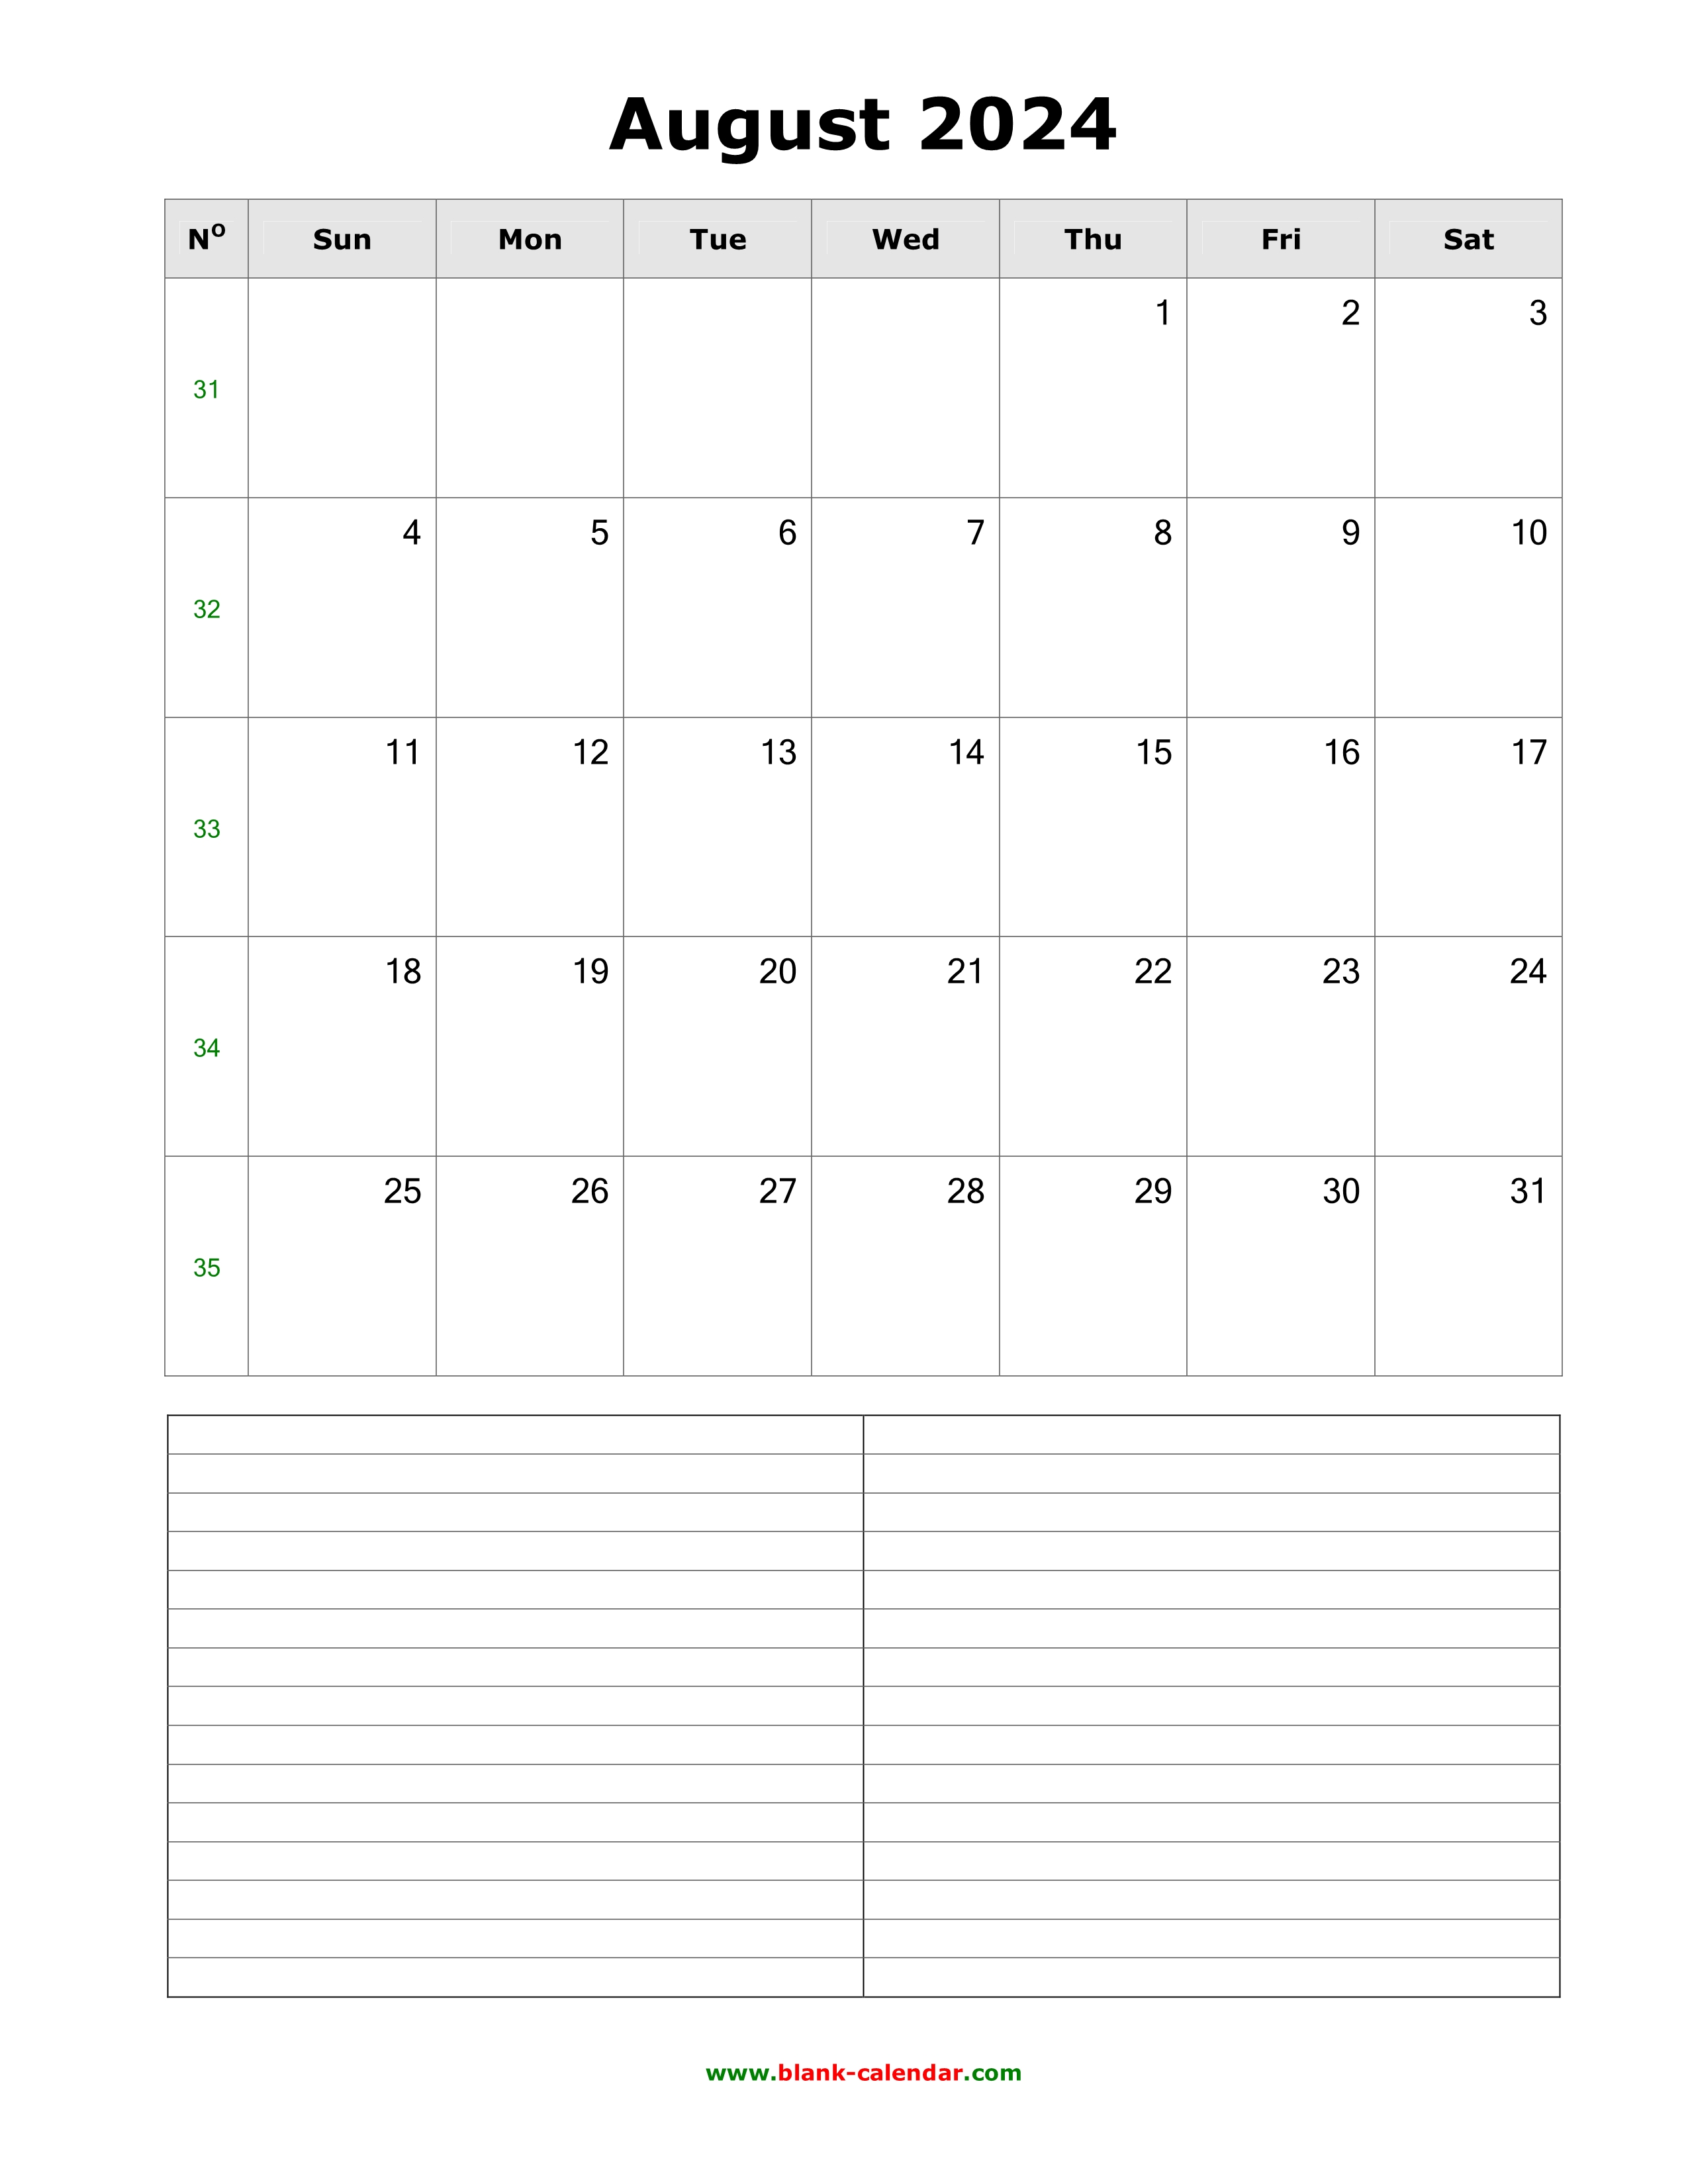 Download August 2024 Blank Calendar with Space for Notes (vertical)